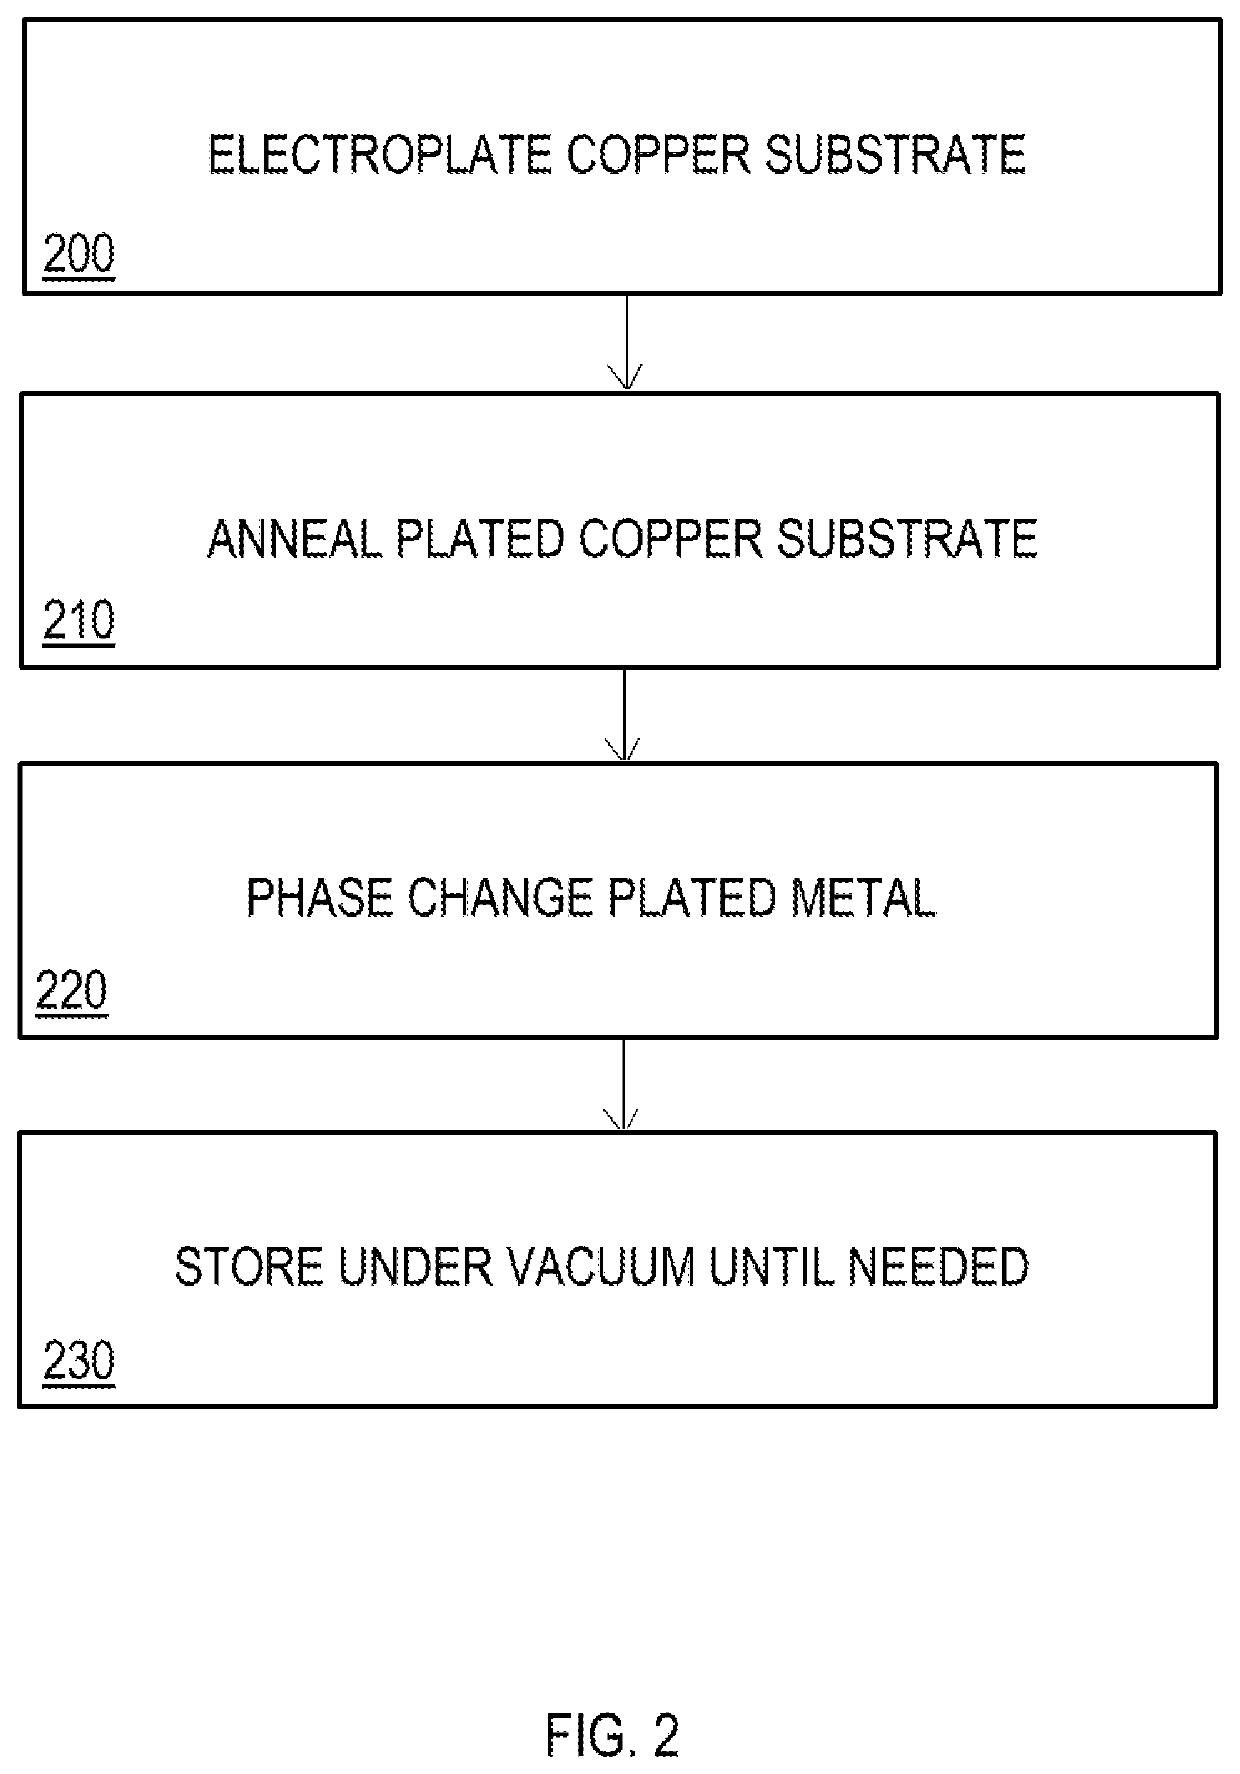 Carbon metal interfaces for electrical connections, electronic and micro circuitry